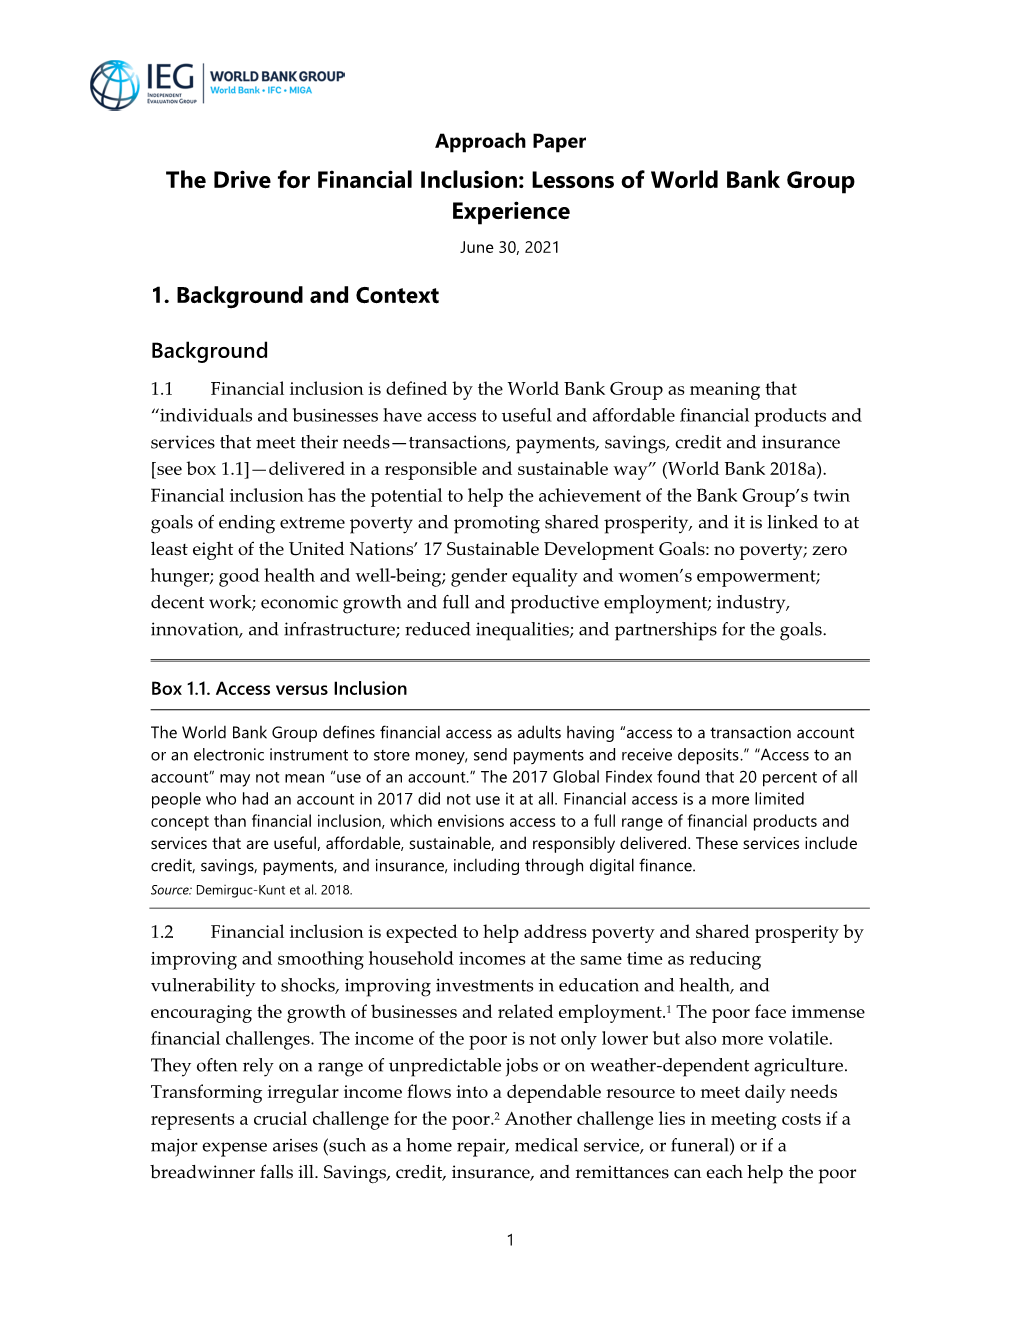 Upcoming the Drive for Financial Inclusion: Lessons of World Bank